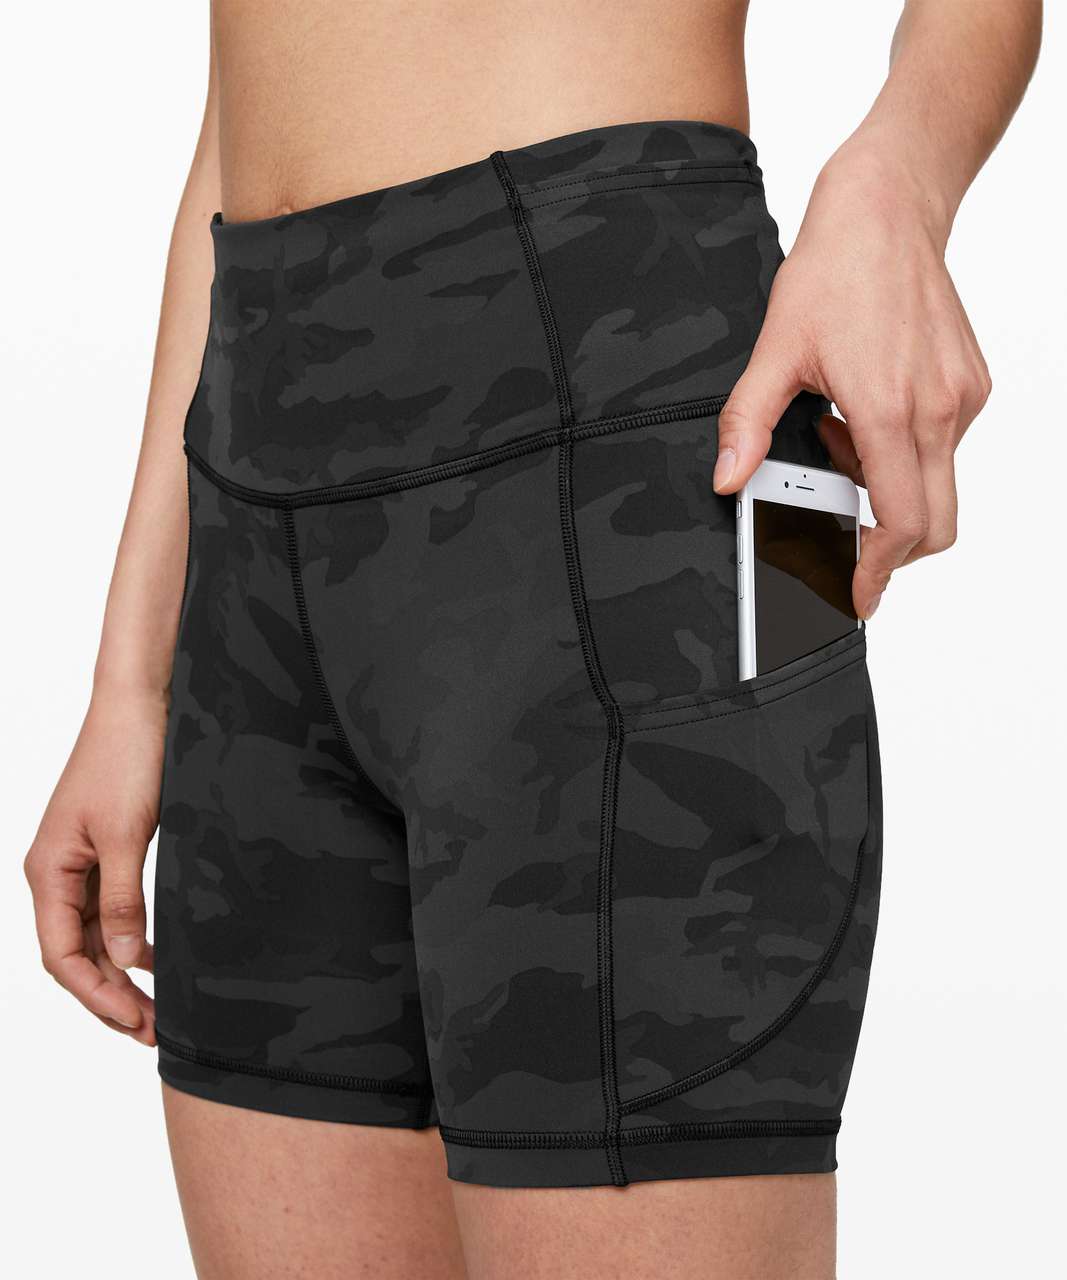 Lululemon Fast and Free shorts look for less from  🤍 Comment LINK2  to have these shorts sent to you via DM! 🤍 Both make grea